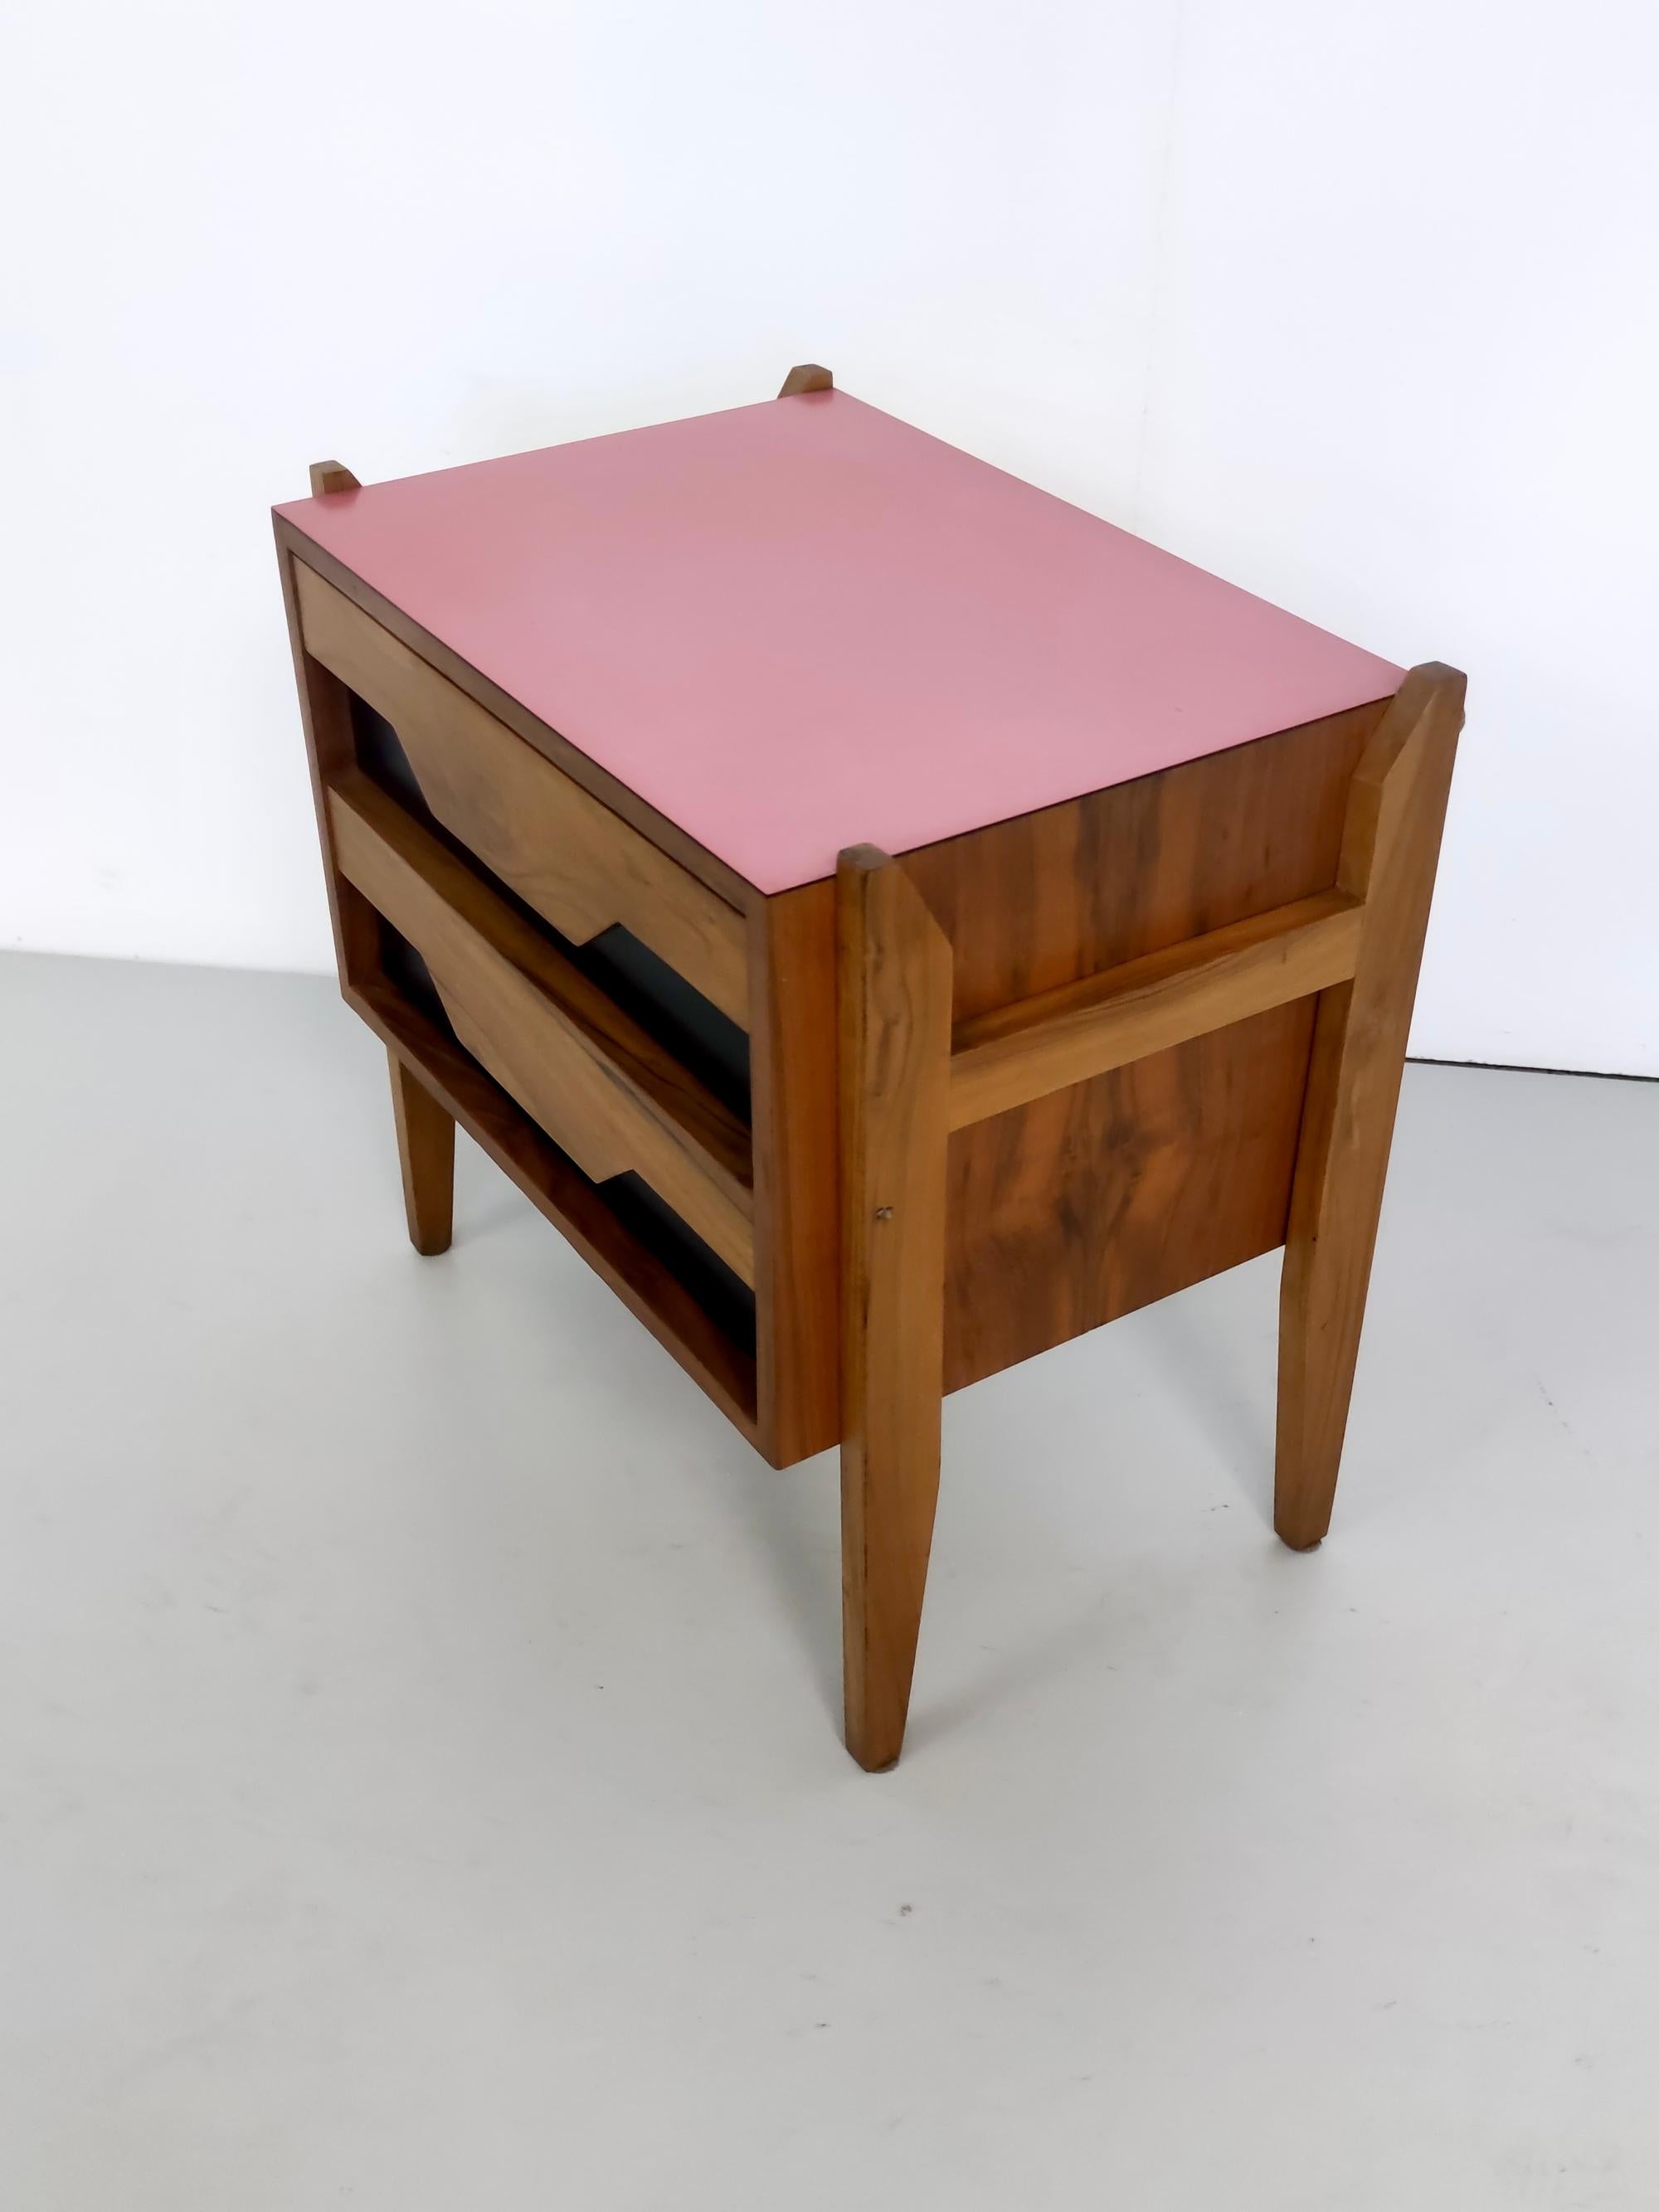 Mid-20th Century Vintage Walnut Nightstand attr. to Ico Parisi with a Pink Top and Black Drawers For Sale